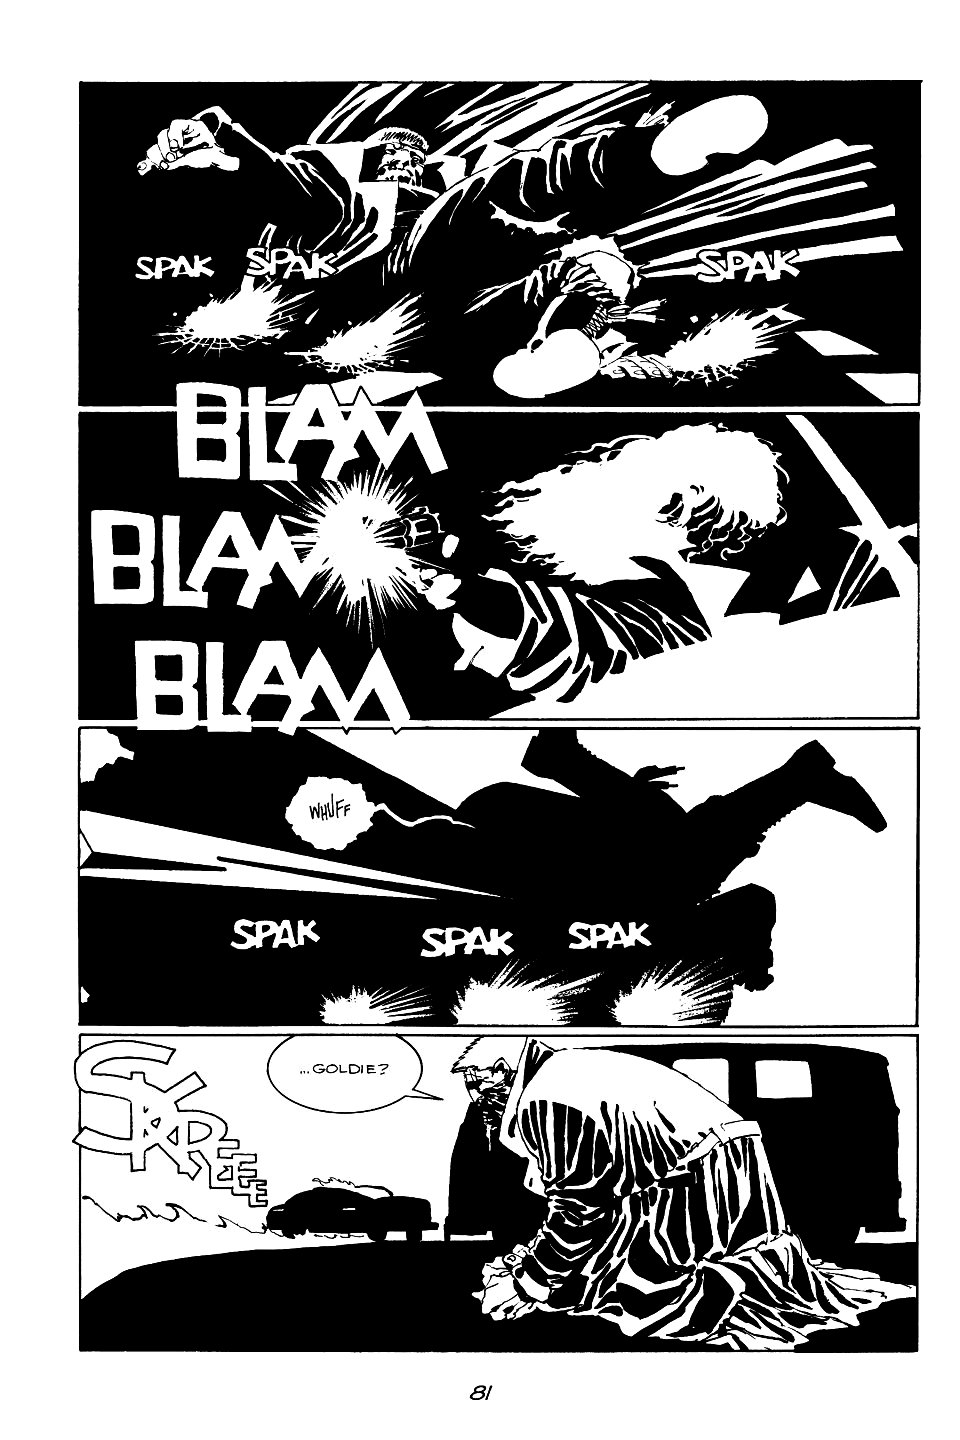 page 81 of sin city 1 the hard goodbye